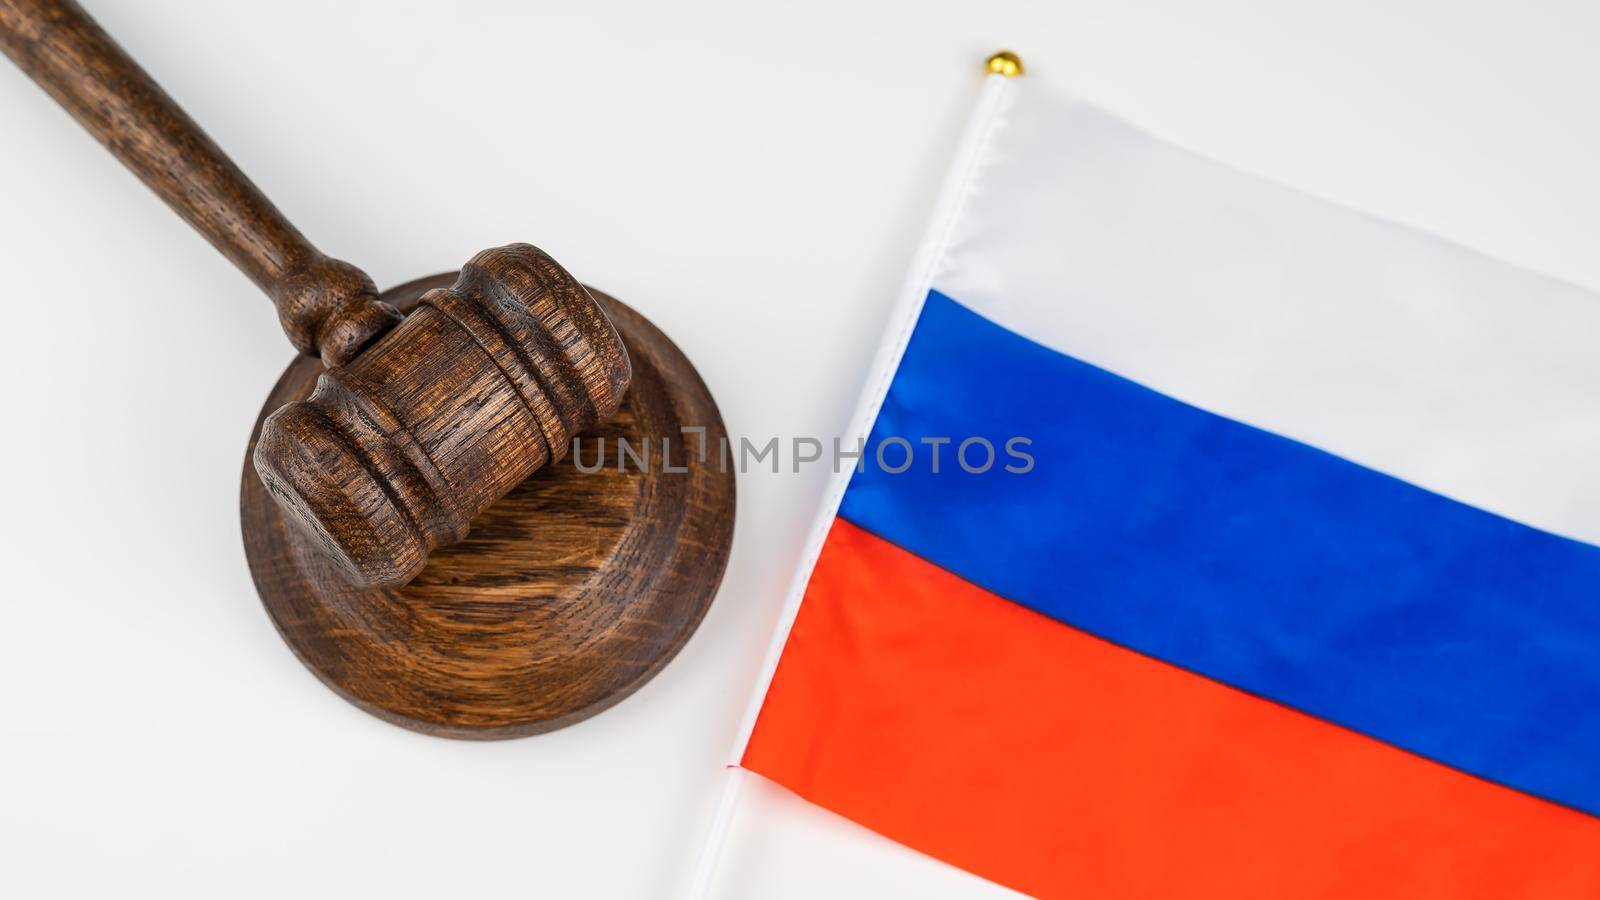 Russian federation flag and judge's gavel on a white table